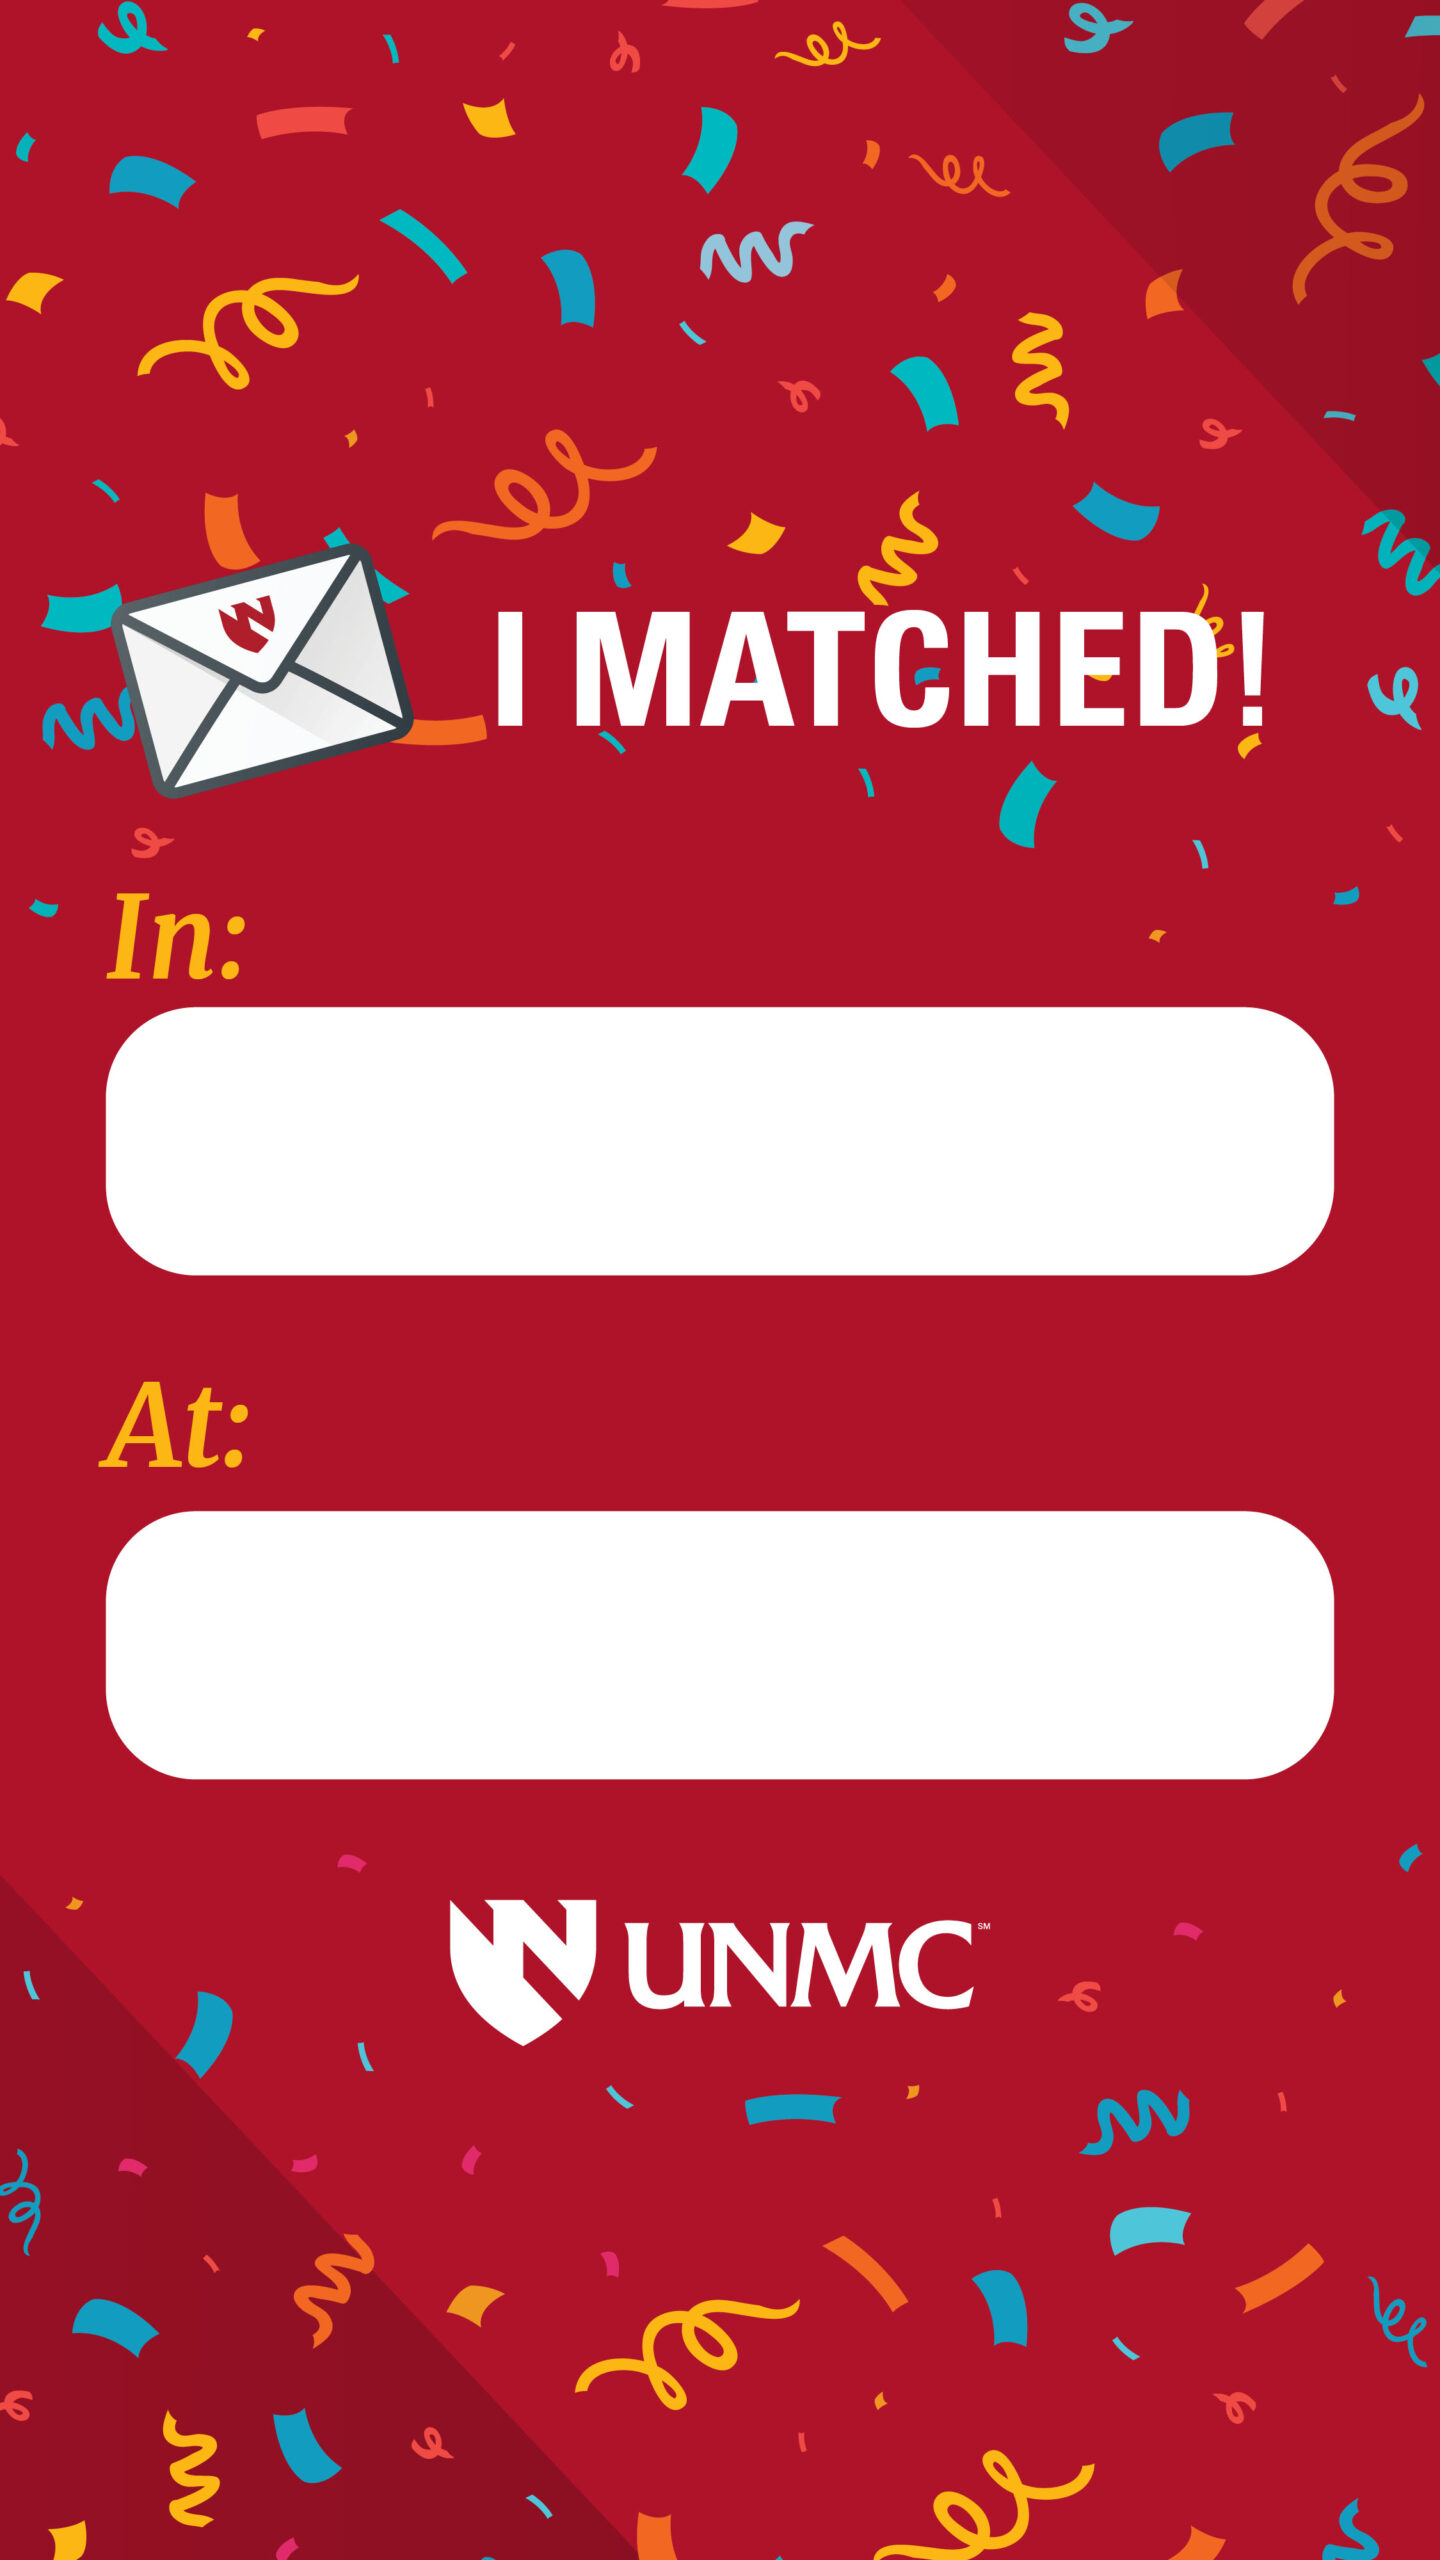 It's Match Day for UNMC med students Newsroom University of